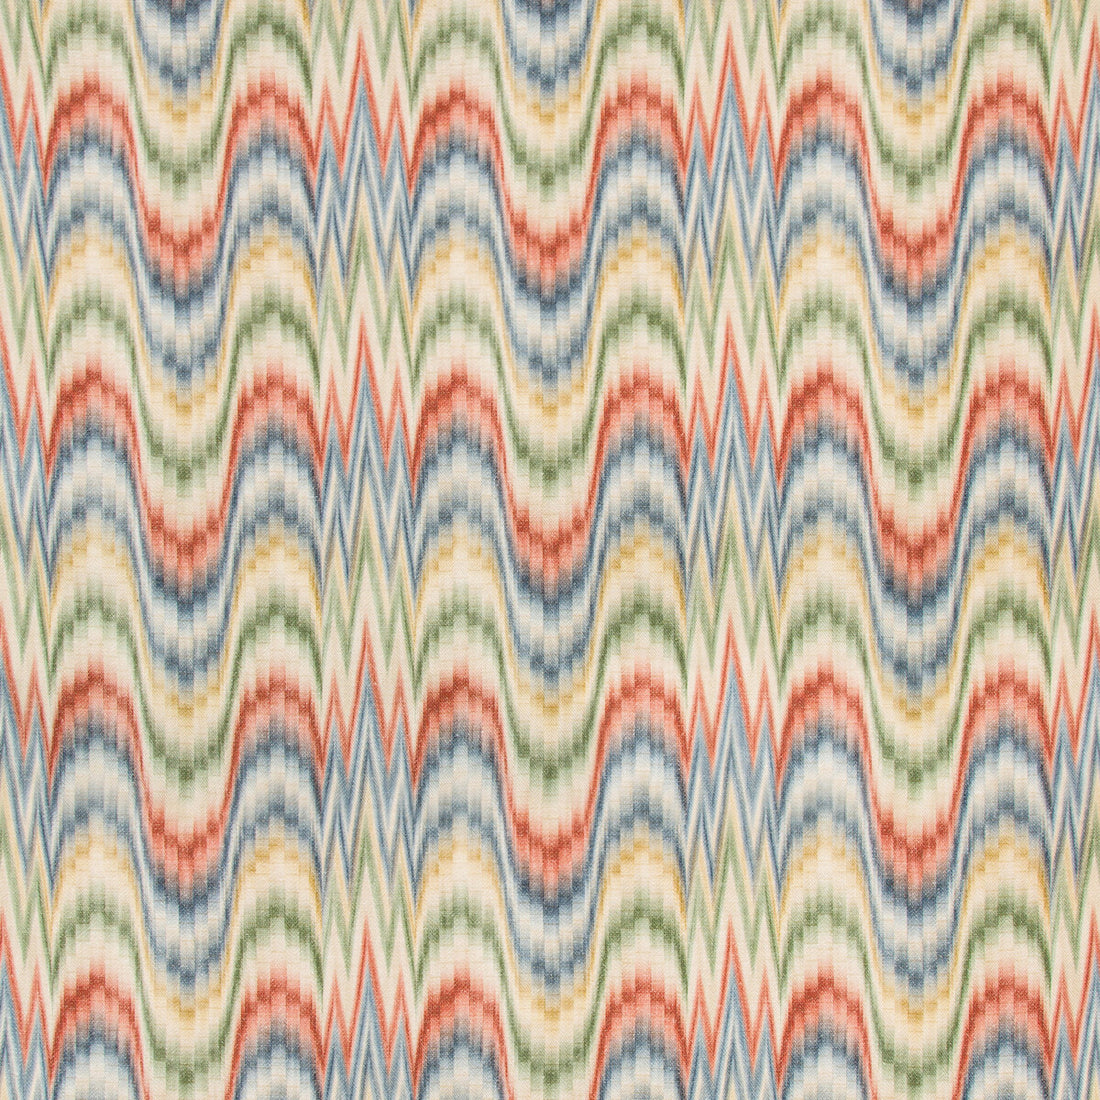 Jasper Print fabric in brick/pool color - pattern 2020185.953.0 - by Lee Jofa in the Avondale collection